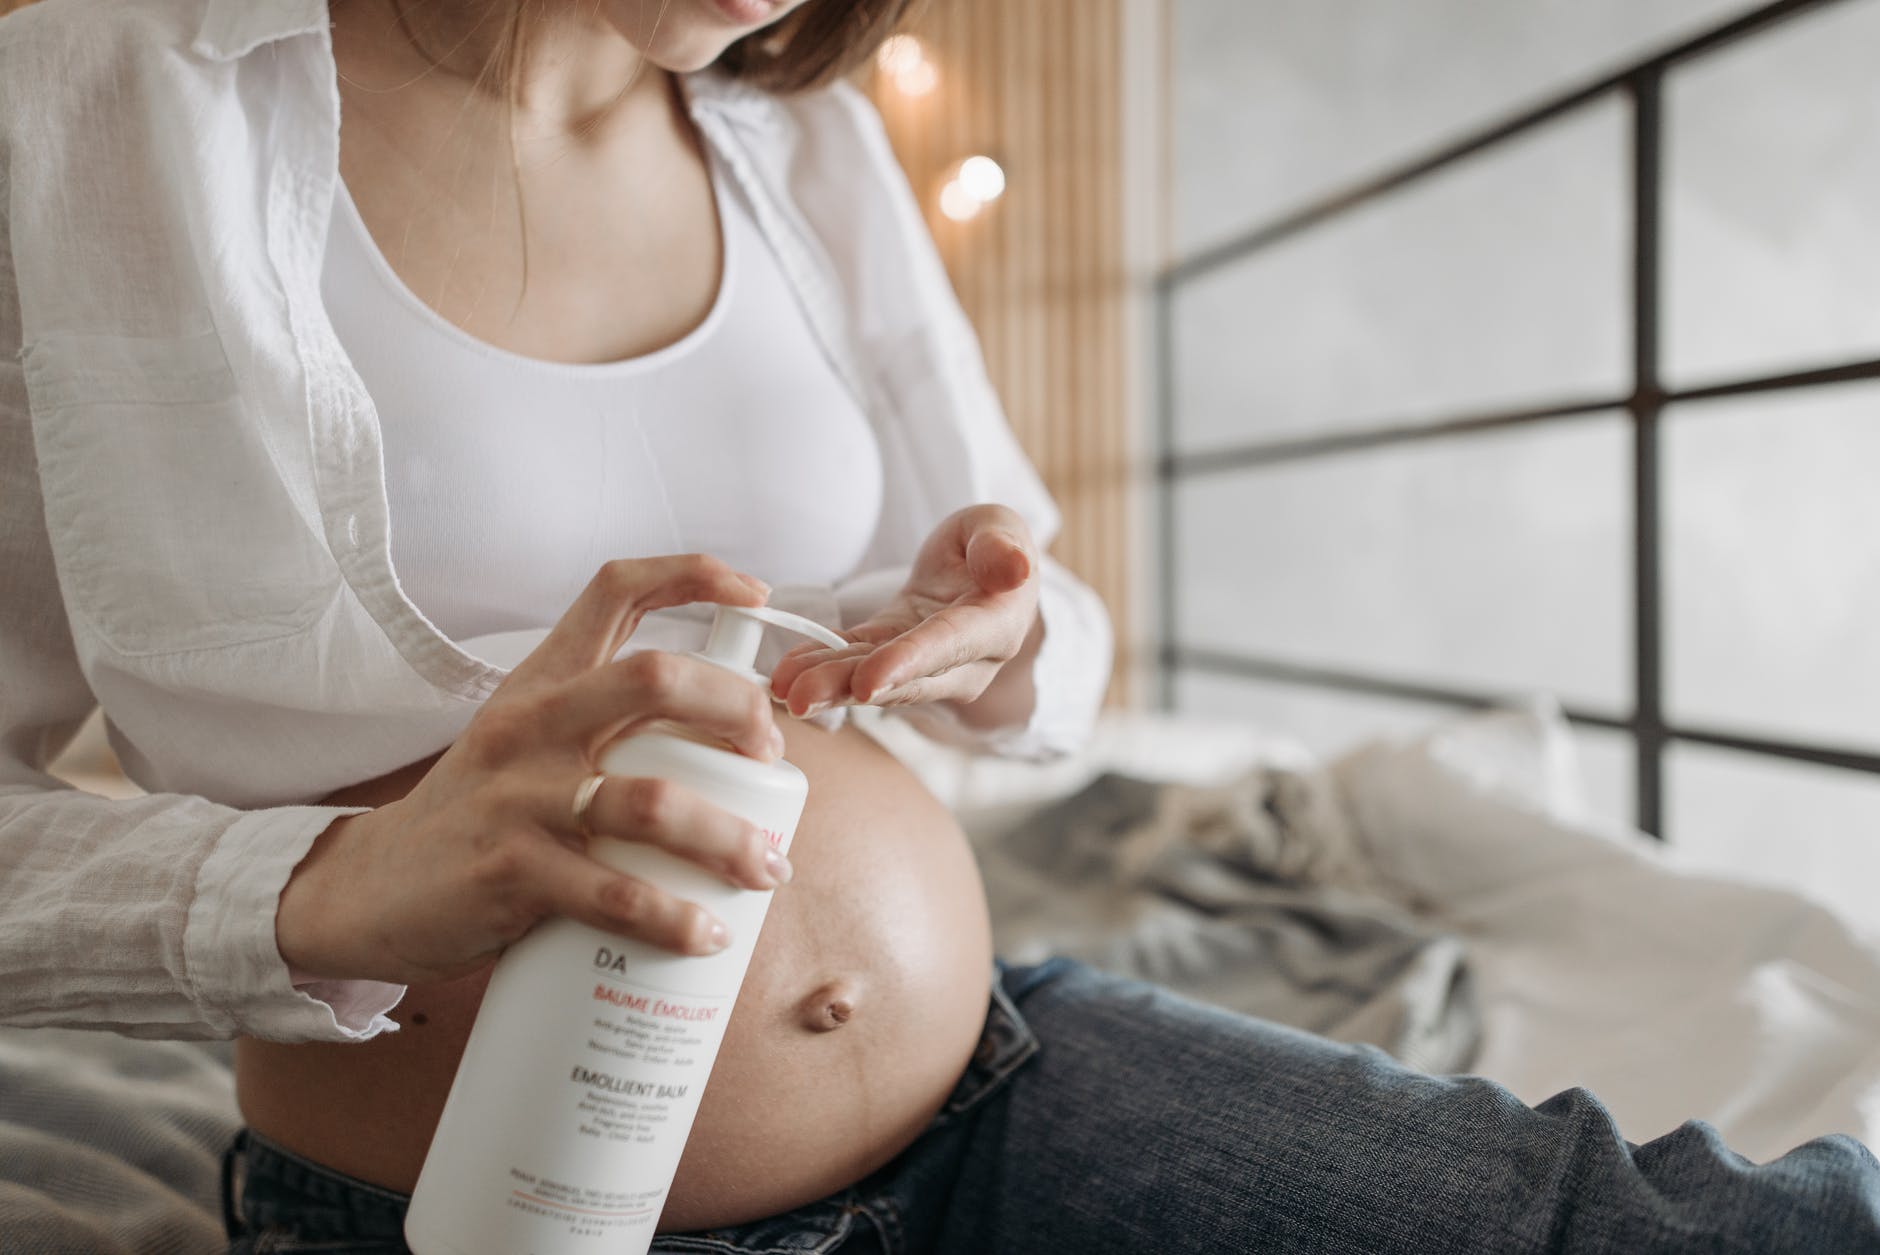 hands of a pregnant woman pumping lotion from a white bottle